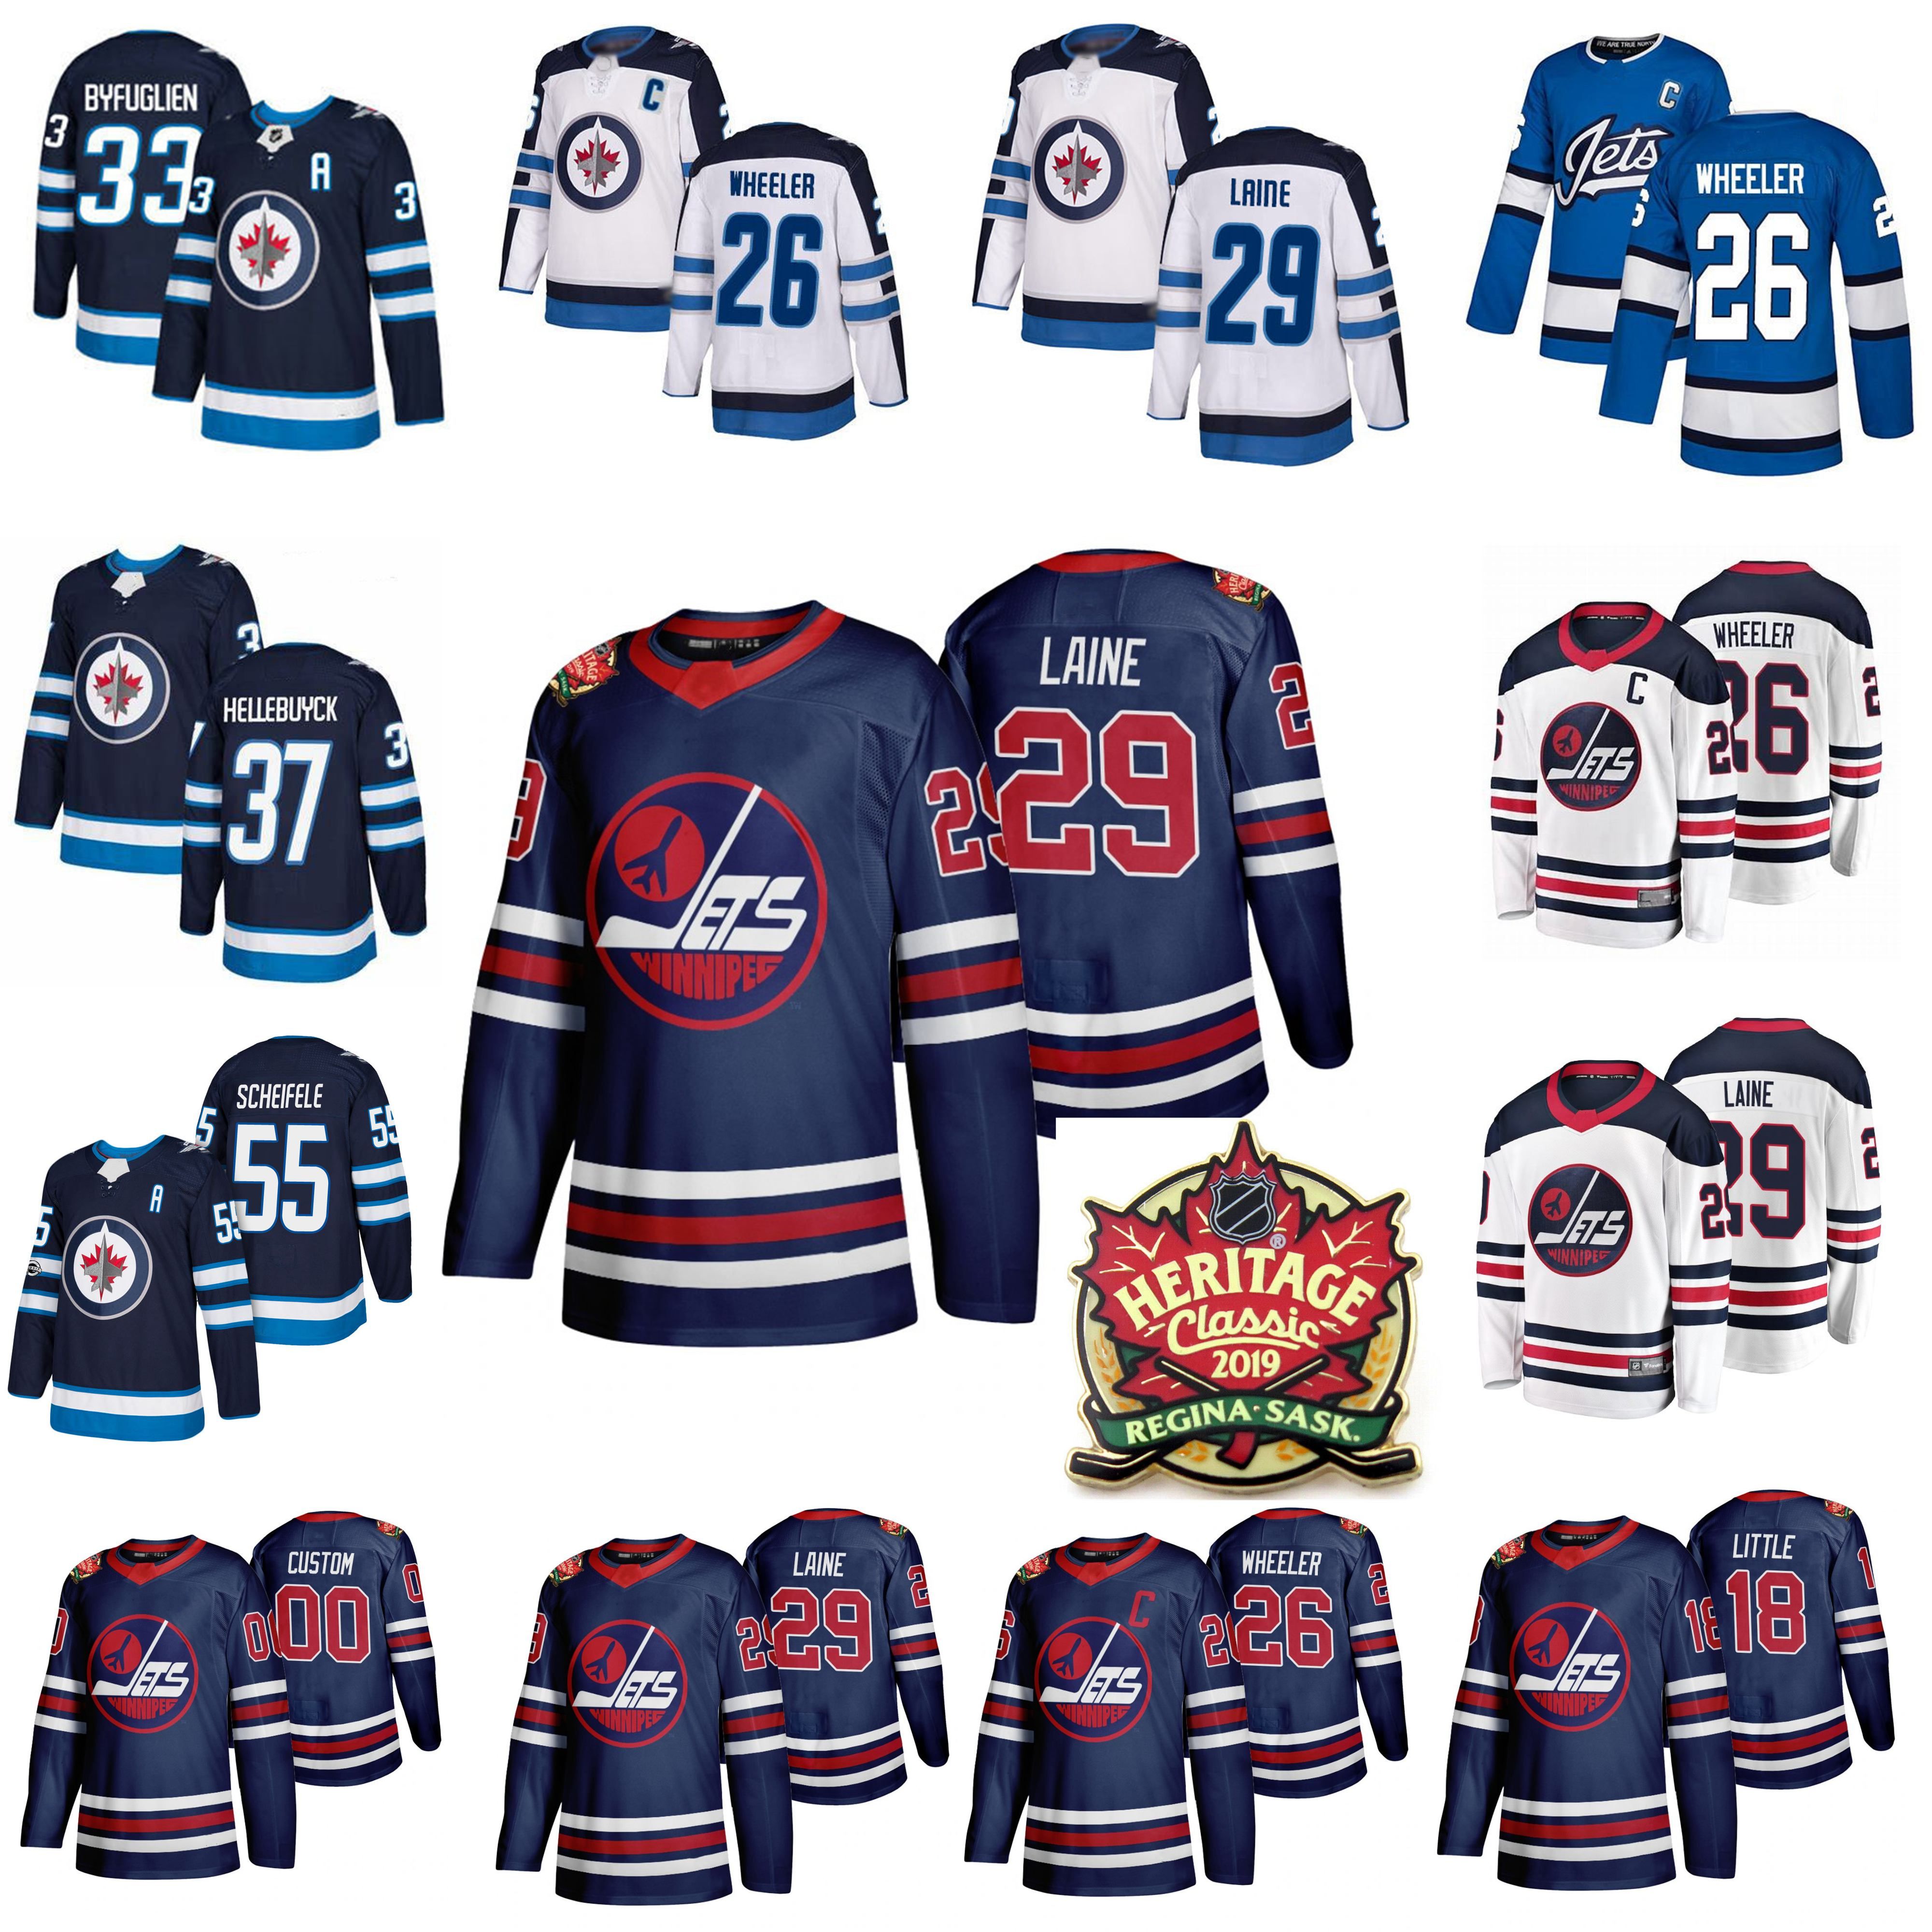 Men's Winnipeg Jets #33 Dustin Byfuglien Navy Blue 2019 Heritage Classic  Adidas Stitched NHL Jersey on sale,for Cheap,wholesale from China